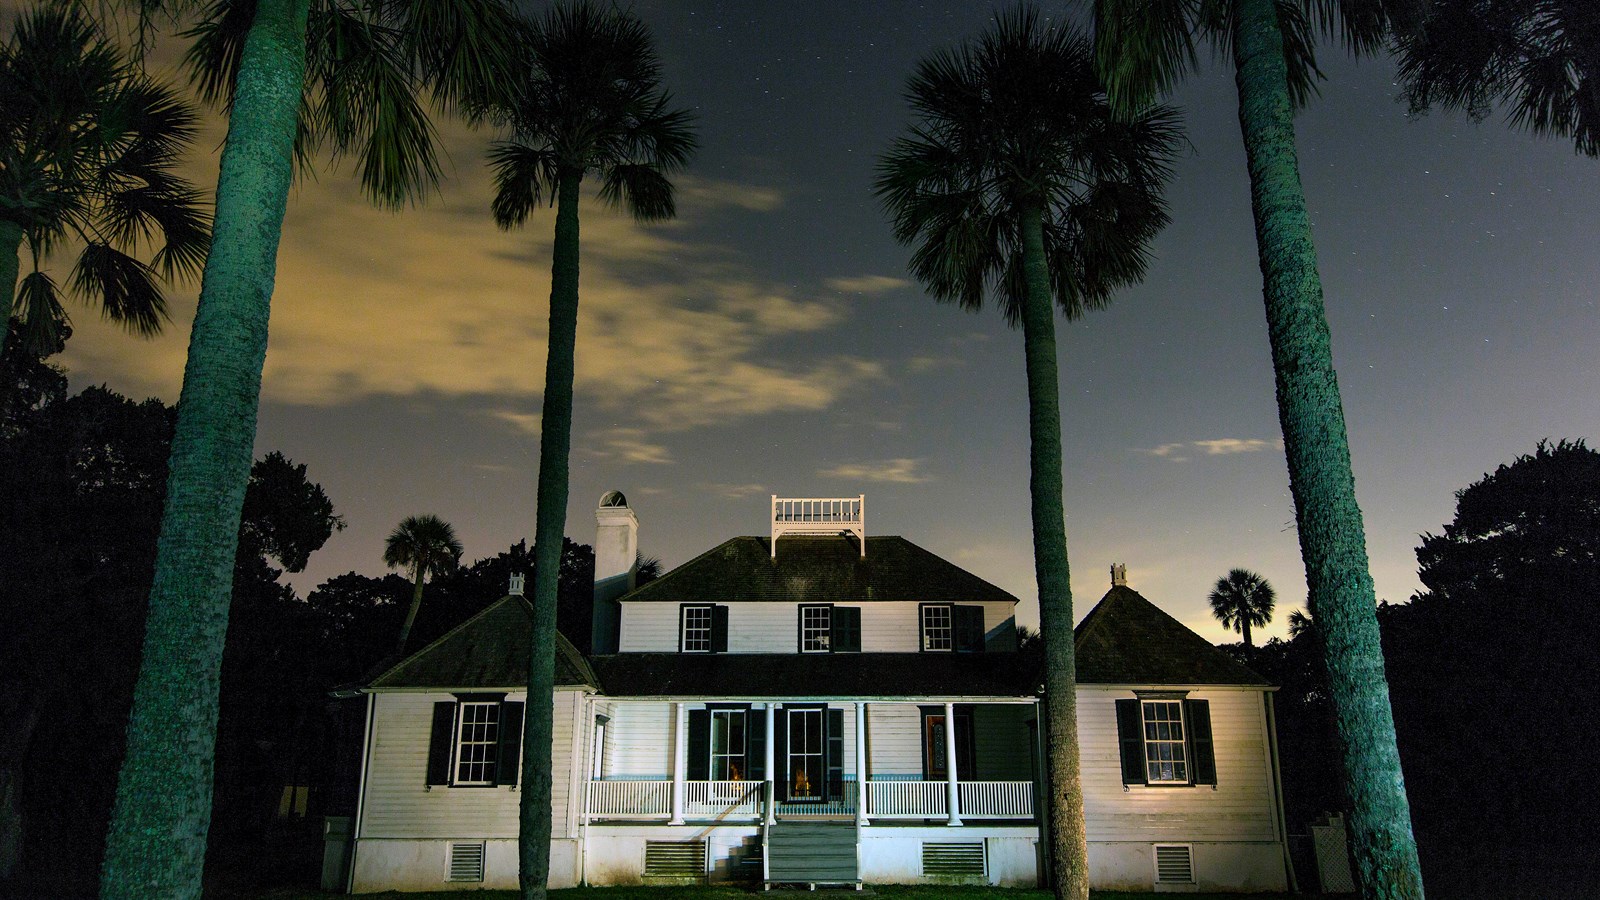 the planters home two sotry white with black shutters palm trees in from and night sky above